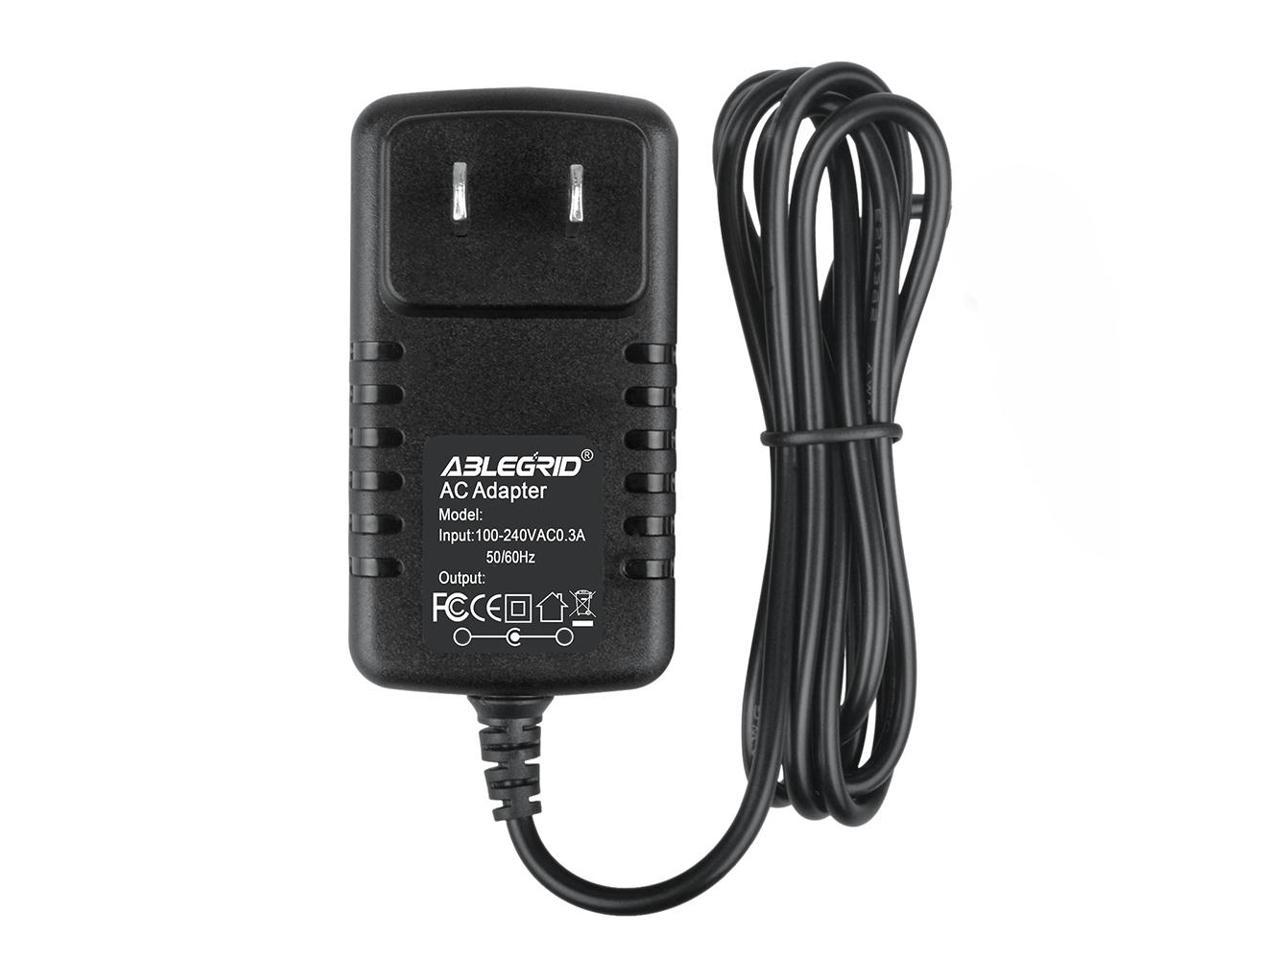 SA115B-09 P-Touch Printer Switching Power Supply PSU AC Adapter for brother P/N 